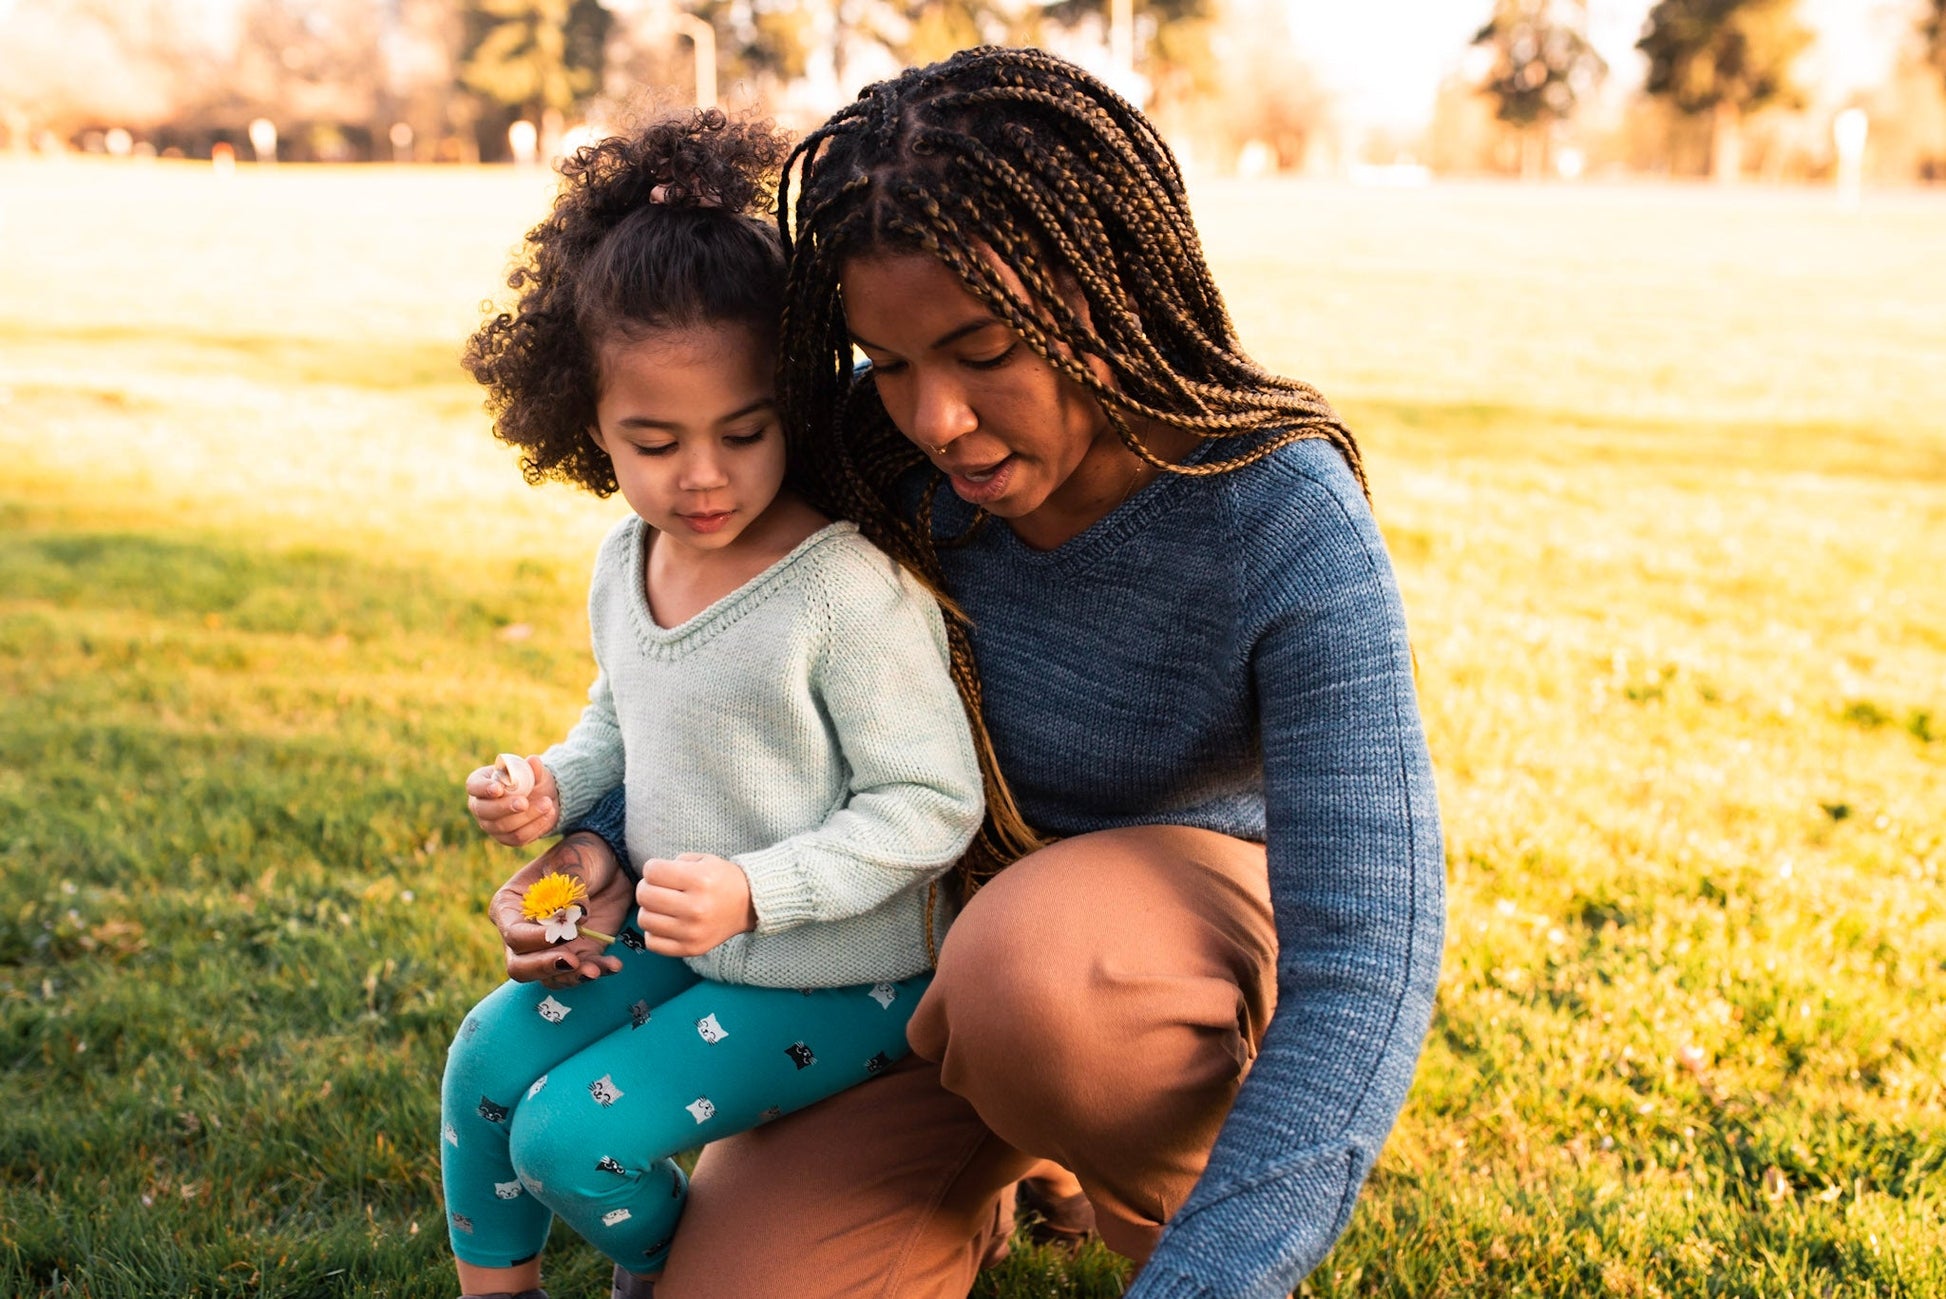 Rachel holds Mia on her knee as she shows her something in the grass. They wear matching hand knit sweaters, each with a scoop neck and cabling details around the cuffs.